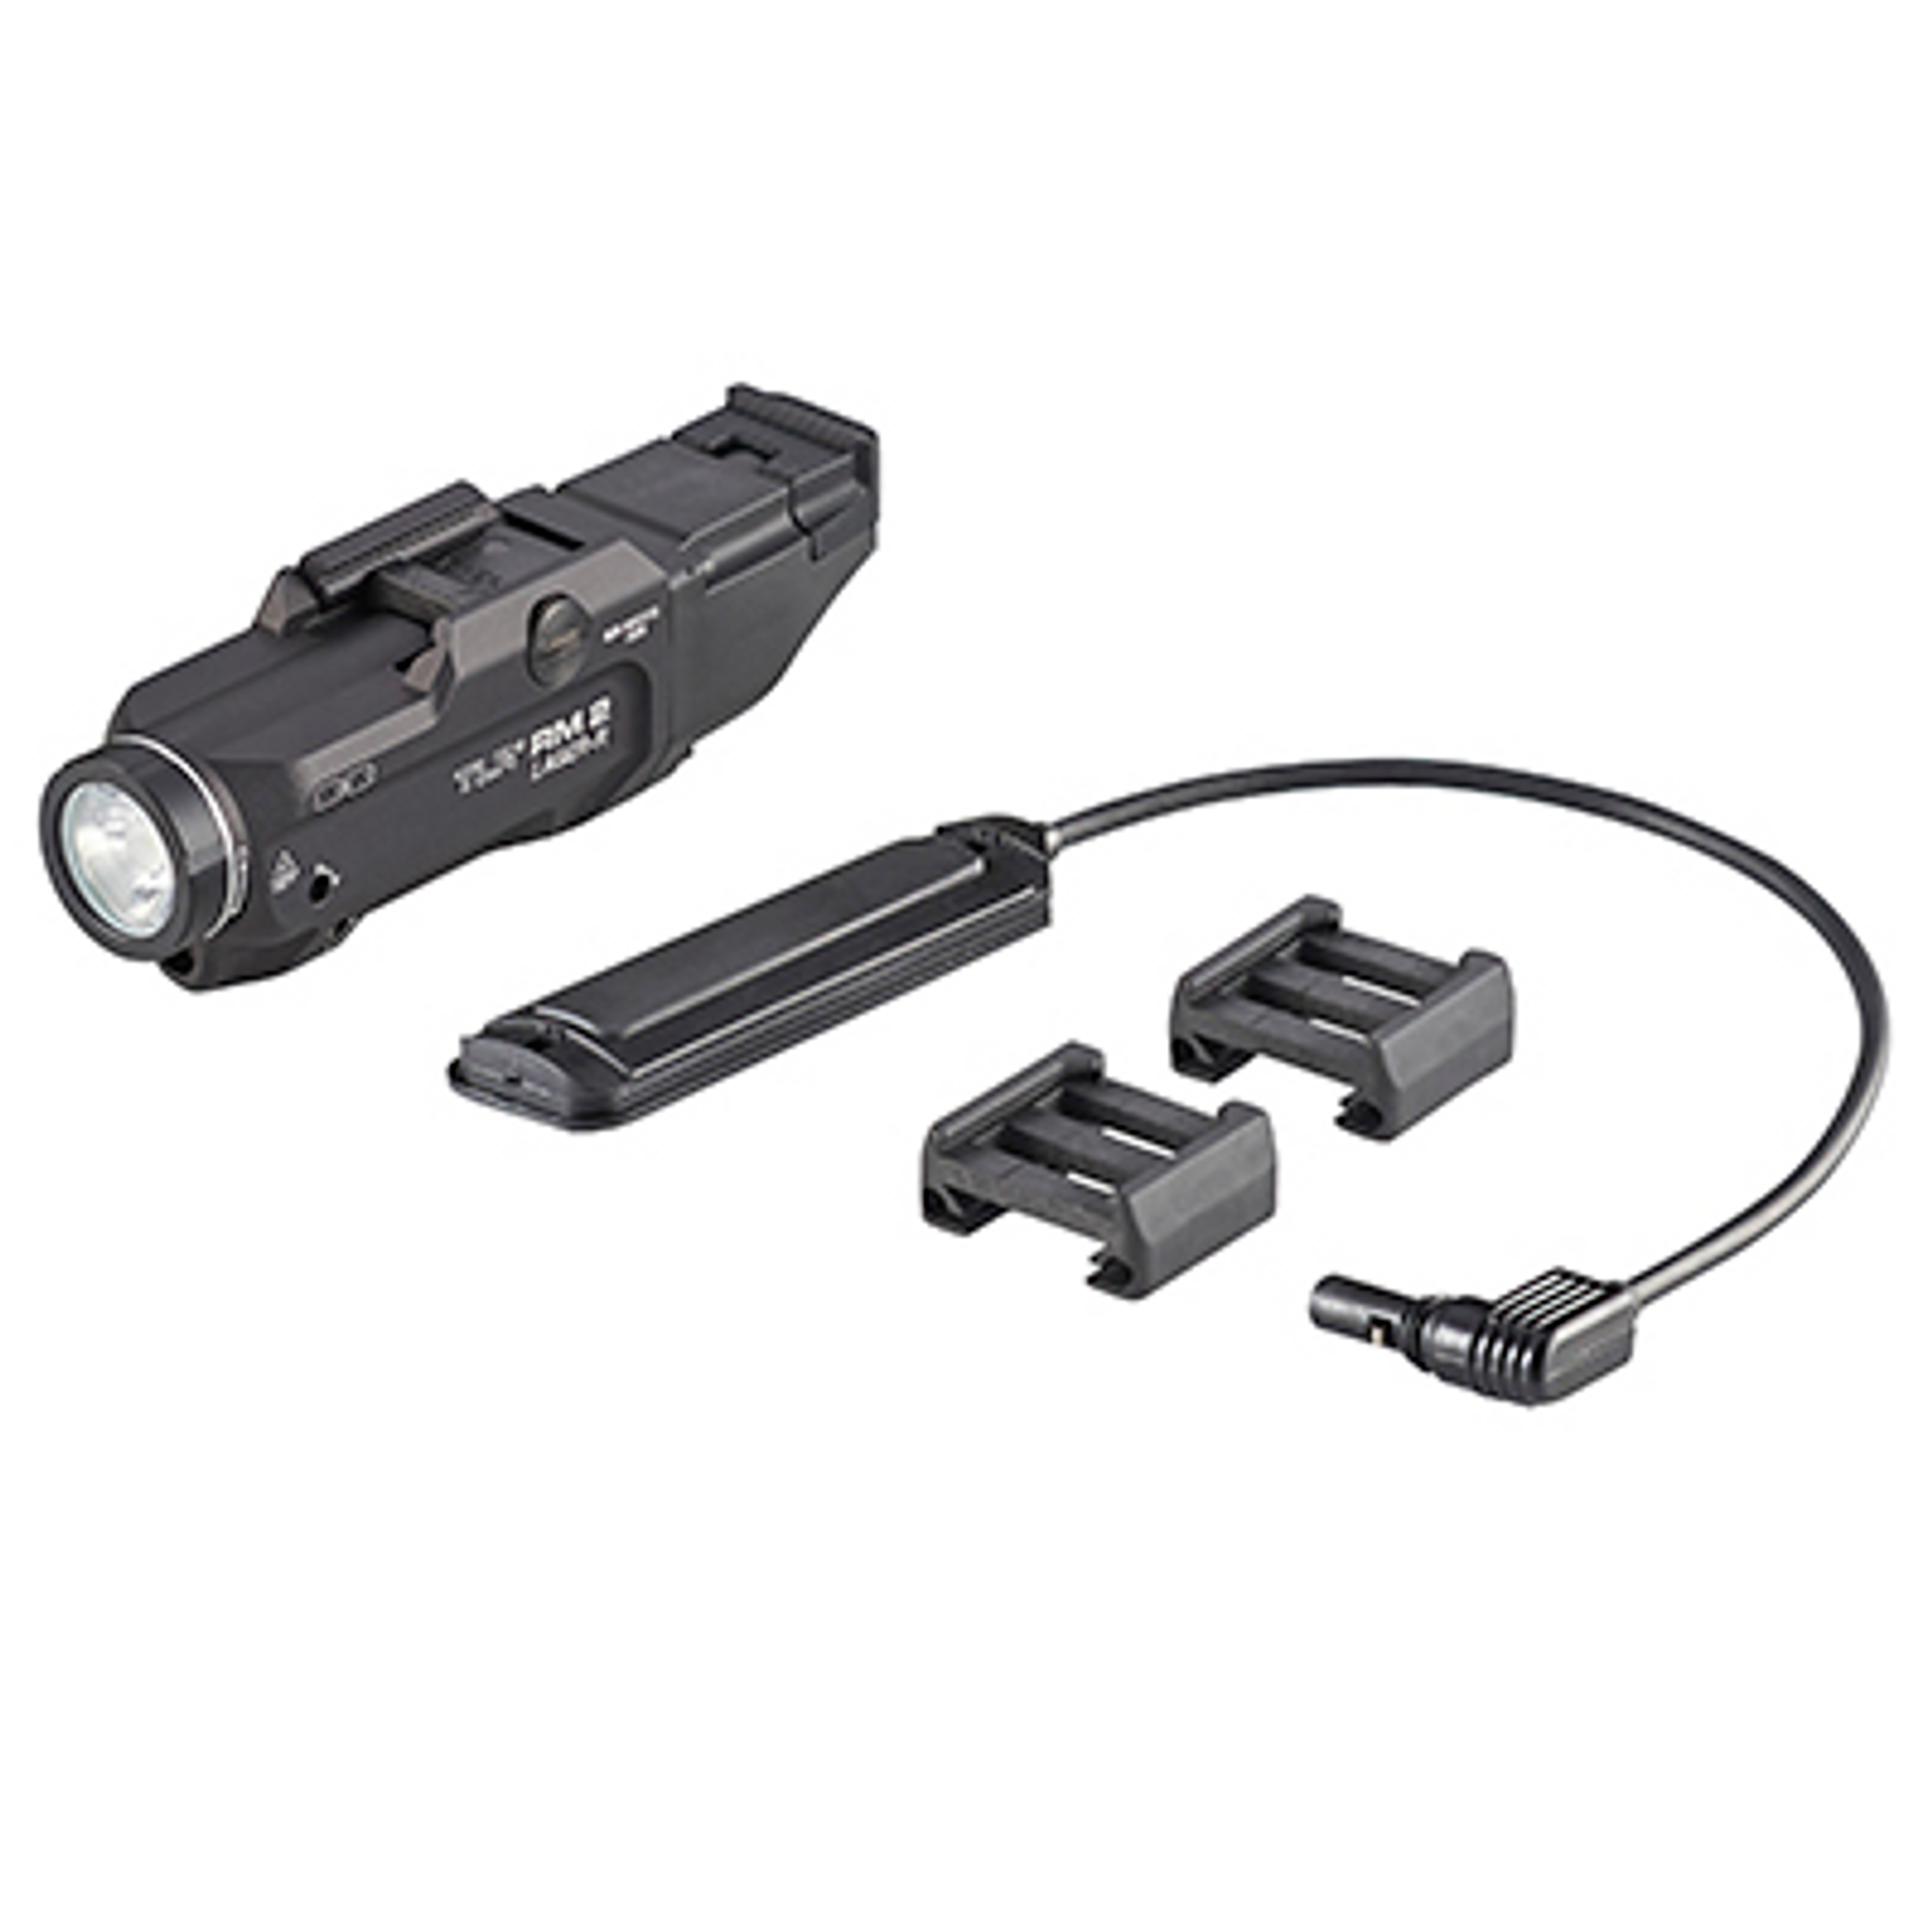 Tlr Rm2 Laser Compact Rail Mounted Tactical Light